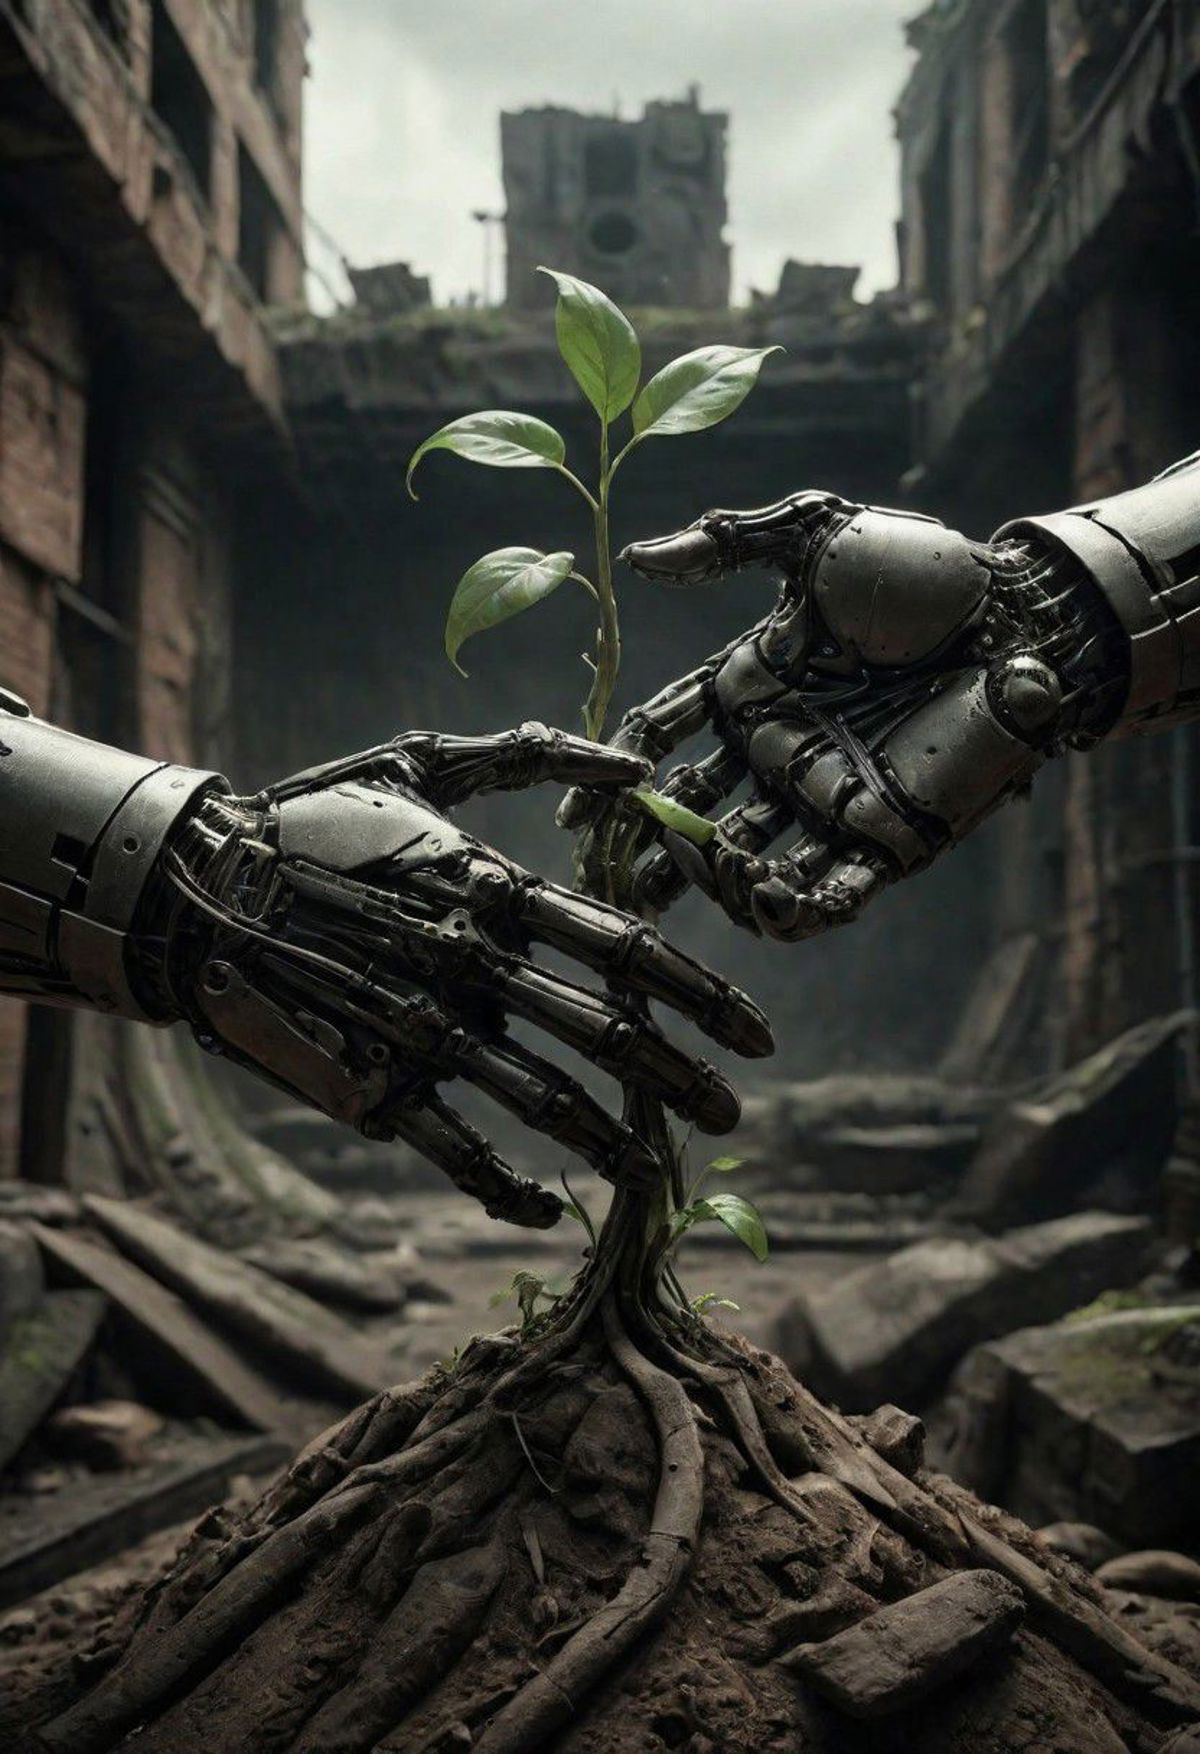 A robotic hand cradling a plant in a dystopian setting.